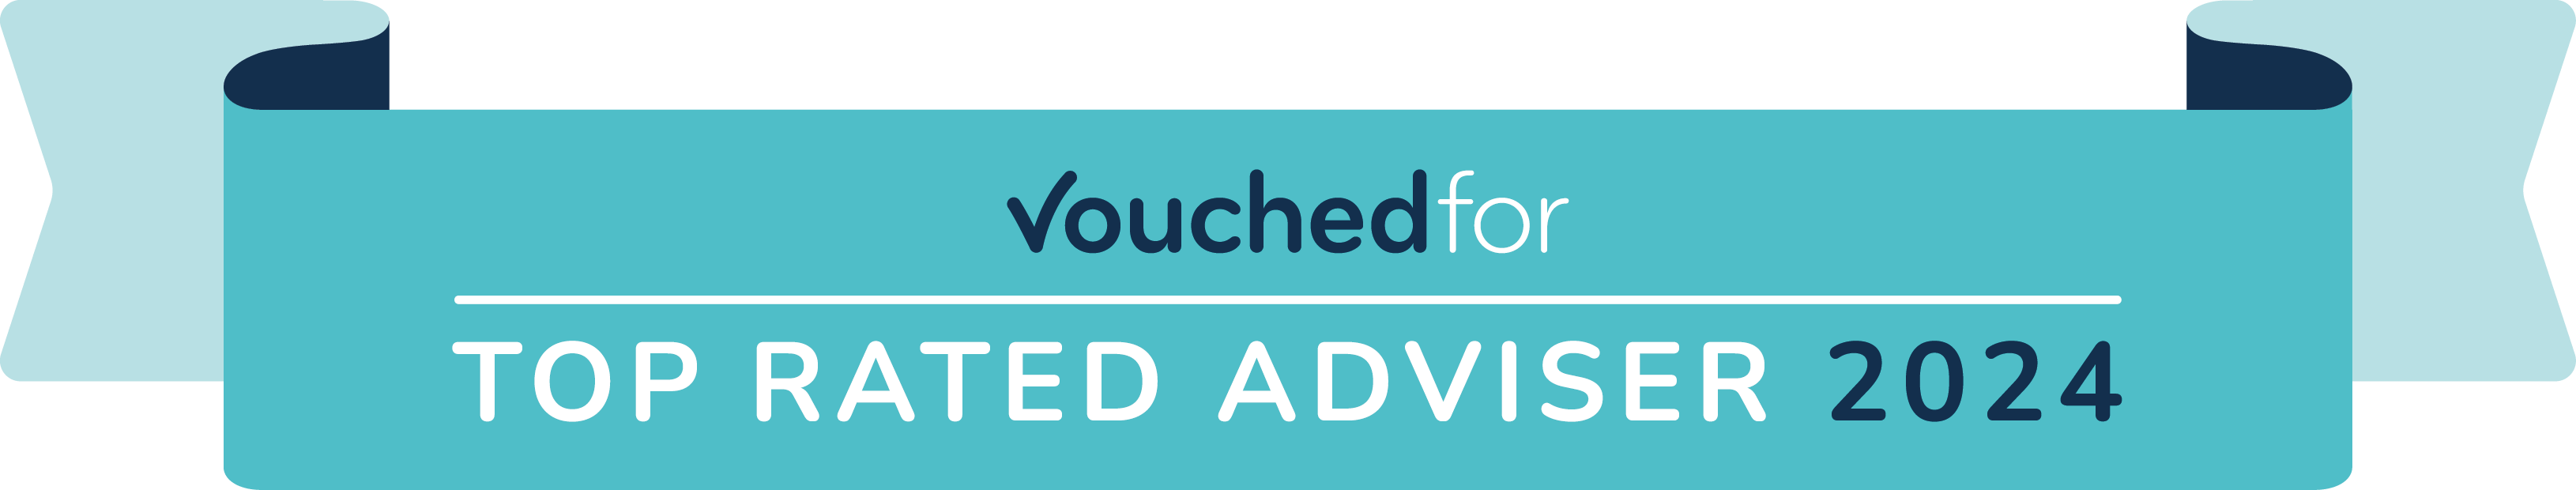 Vouched For Top Rated Adviser 2024